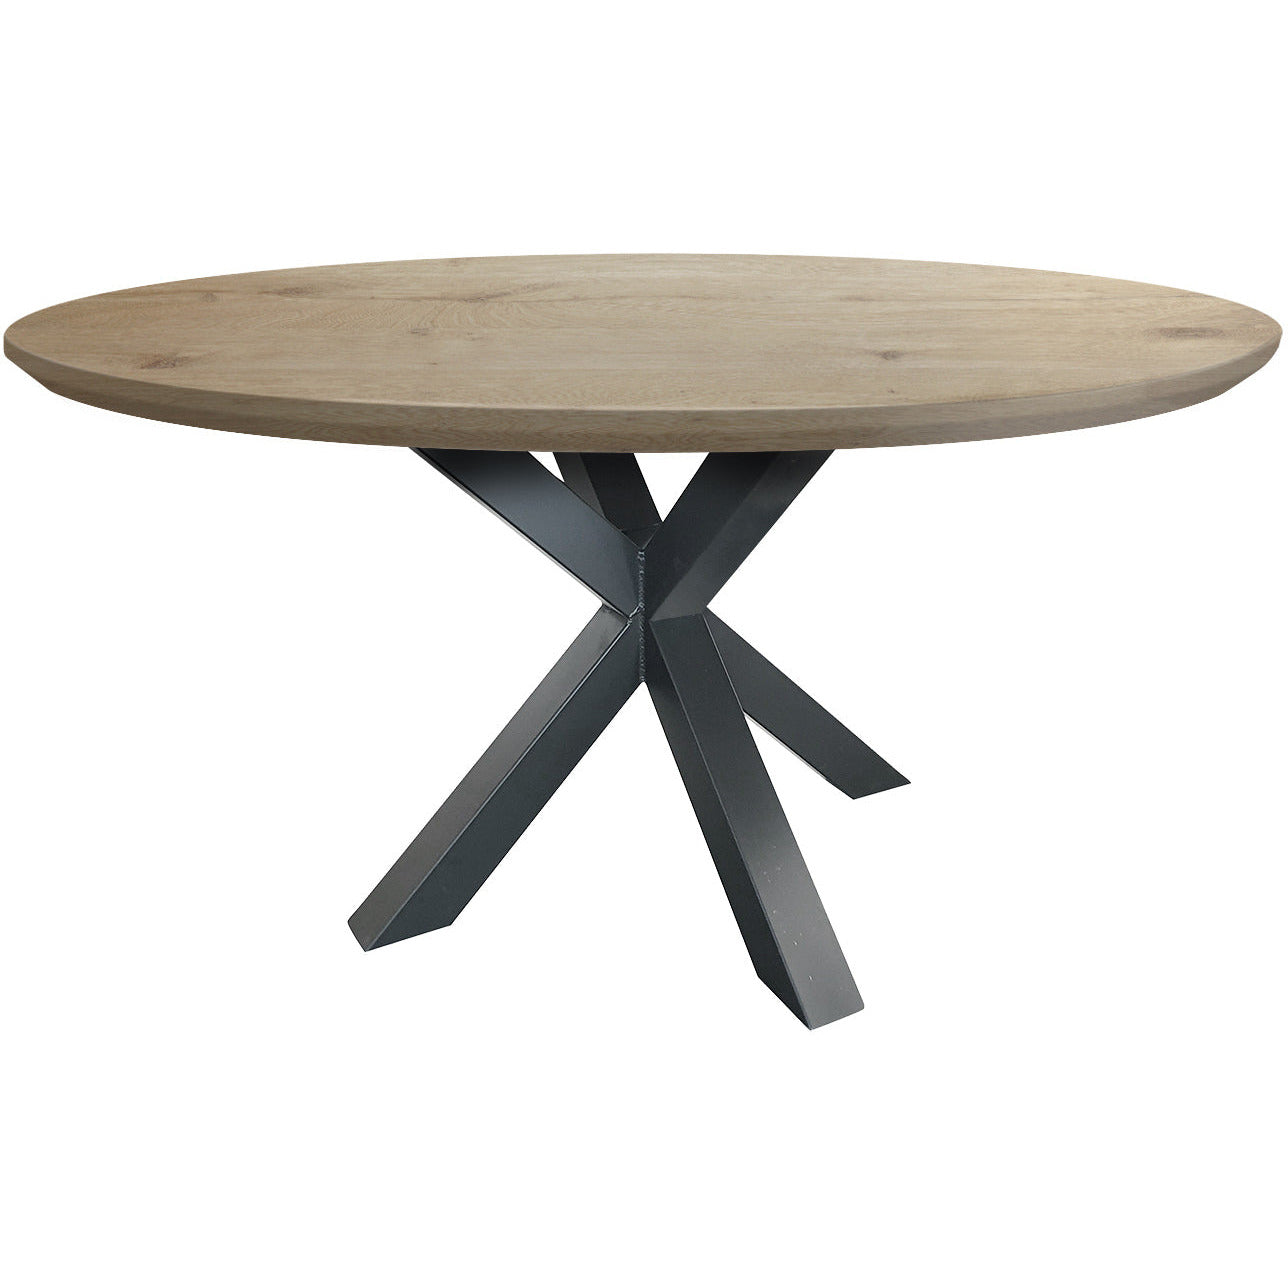 Dining table | Round | Whitewash | Oak wood | Lacquered Spider Leg |